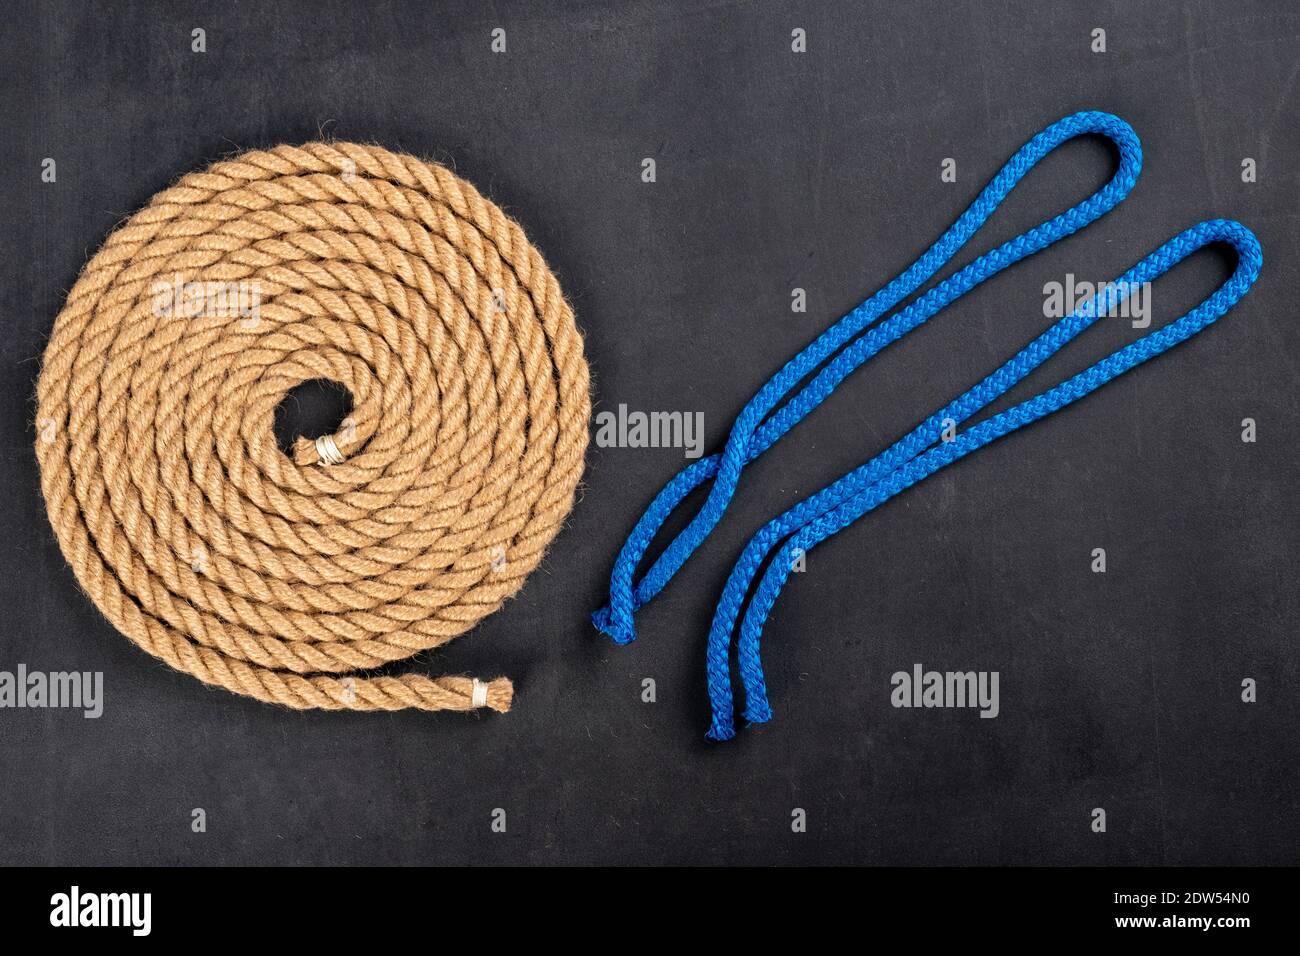 https://c8.alamy.com/comp/2DW54N0/thick-jute-rope-coiled-into-a-circle-and-short-lines-for-tying-the-sails-sailing-accessories-used-on-yachts-dark-background-2DW54N0.jpg